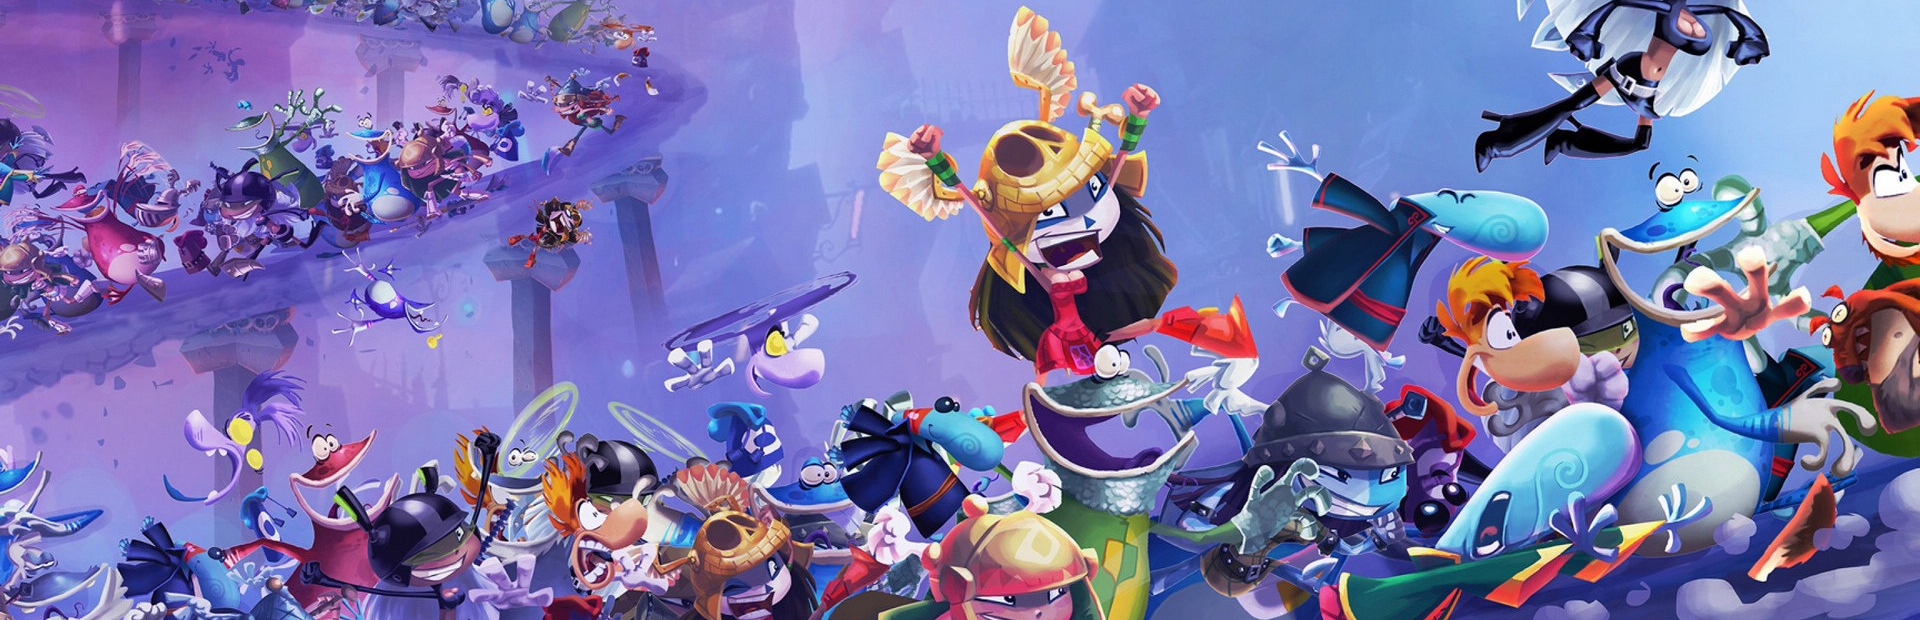 Rayman Legends Free Android - Colaboratory